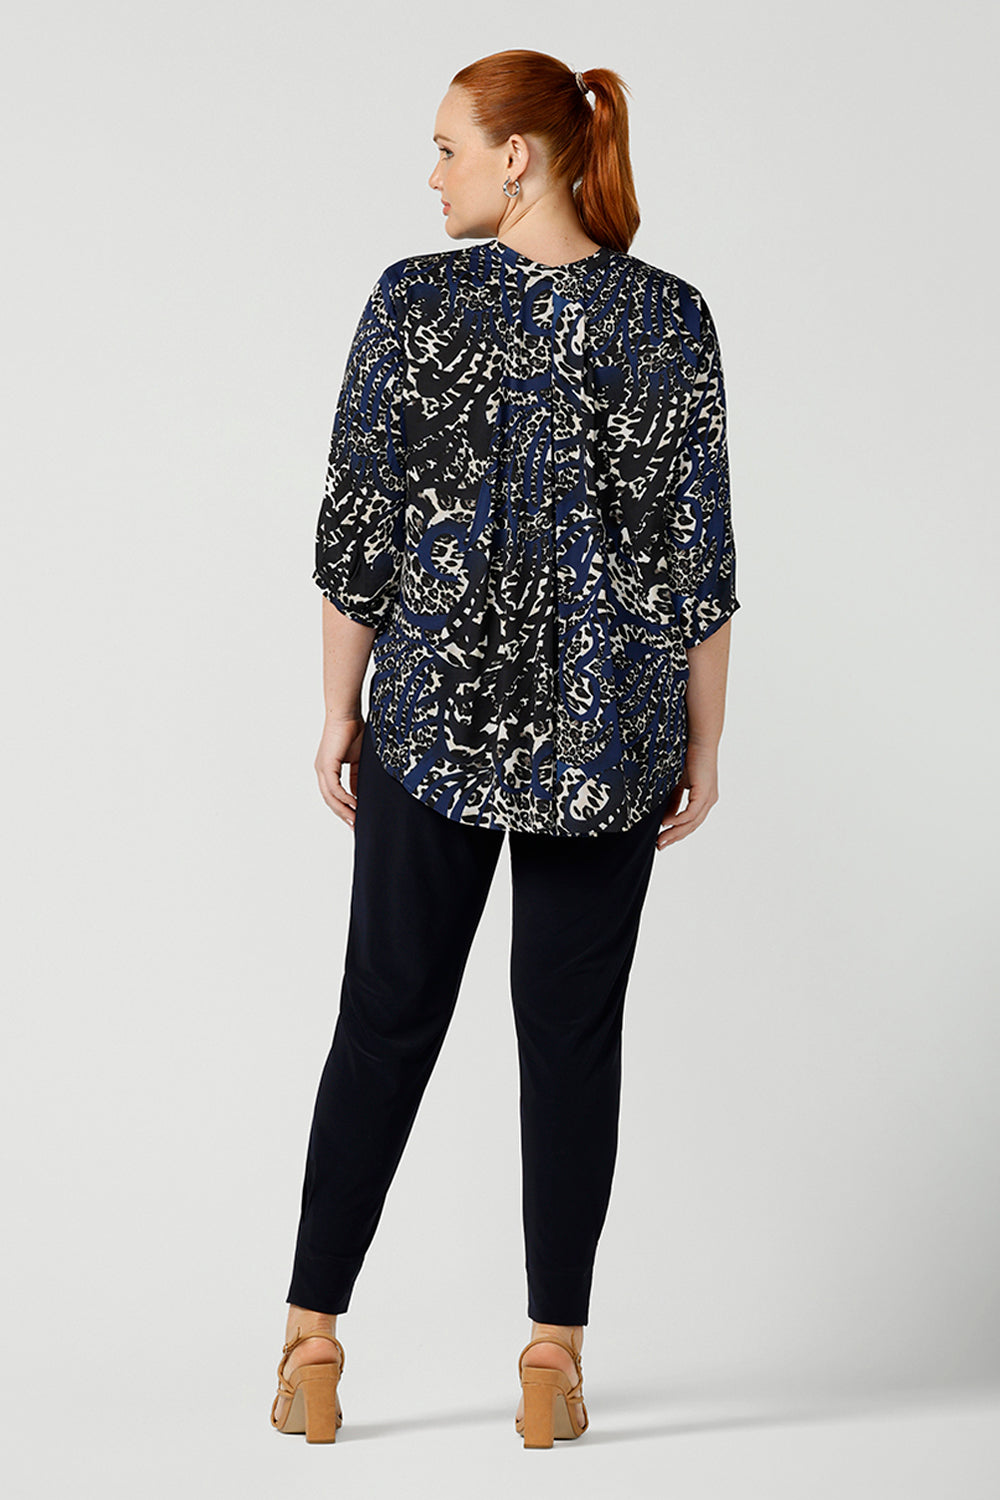 Back view of A size 12 woman wearing an animal print woven top with a swing back. This lightweight top is comfortable for your everyday workwear, casual and travel capsule wardrobe. Shop this Australian-made shirt online in sizes 8 to 24, petite to plus sizes.